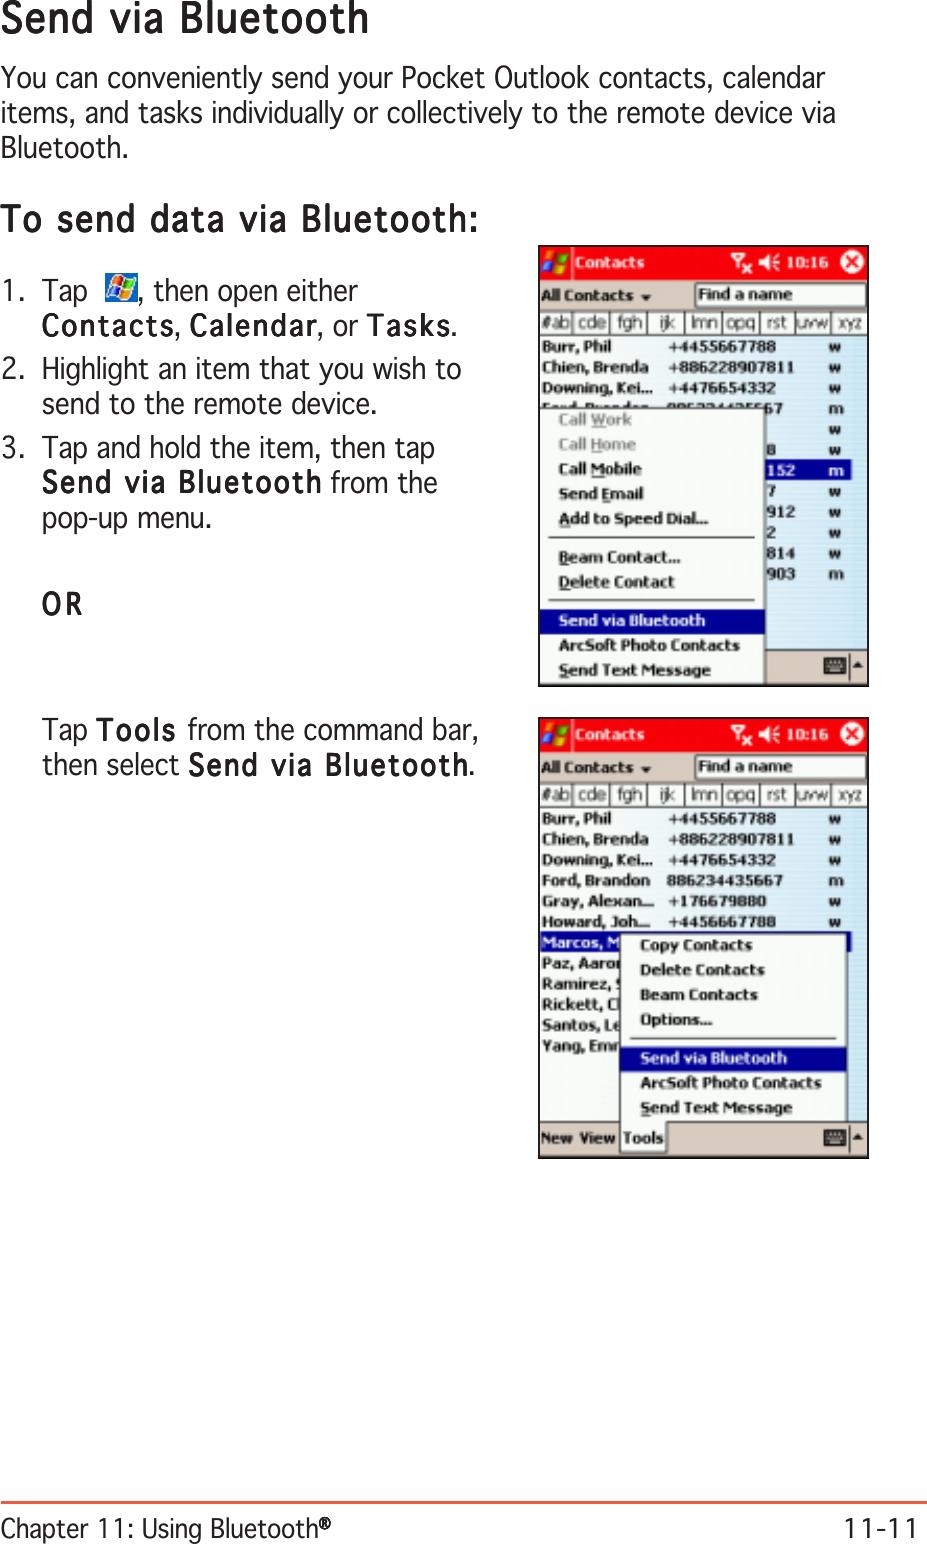 Chapter 11: Using Bluetooth®®®®®11-11Send via BluetoothSend via BluetoothSend via BluetoothSend via BluetoothSend via BluetoothYou can conveniently send your Pocket Outlook contacts, calendaritems, and tasks individually or collectively to the remote device viaBluetooth.To send data via Bluetooth:To send data via Bluetooth:To send data via Bluetooth:To send data via Bluetooth:To send data via Bluetooth:1. Tap   , then open eitherContactsContactsContactsContactsContacts, CalendarCalendarCalendarCalendarCalendar, or TasksTasksTasksTasksTasks.2. Highlight an item that you wish tosend to the remote device.3. Tap and hold the item, then tapSend via BluetoothSend via BluetoothSend via BluetoothSend via BluetoothSend via Bluetooth from thepop-up menu.ORORORORORTap ToolsToolsToolsToolsToo ls from the command bar,then select Send via BluetoothSend via BluetoothSend via BluetoothSend via BluetoothSend via Bluetooth.